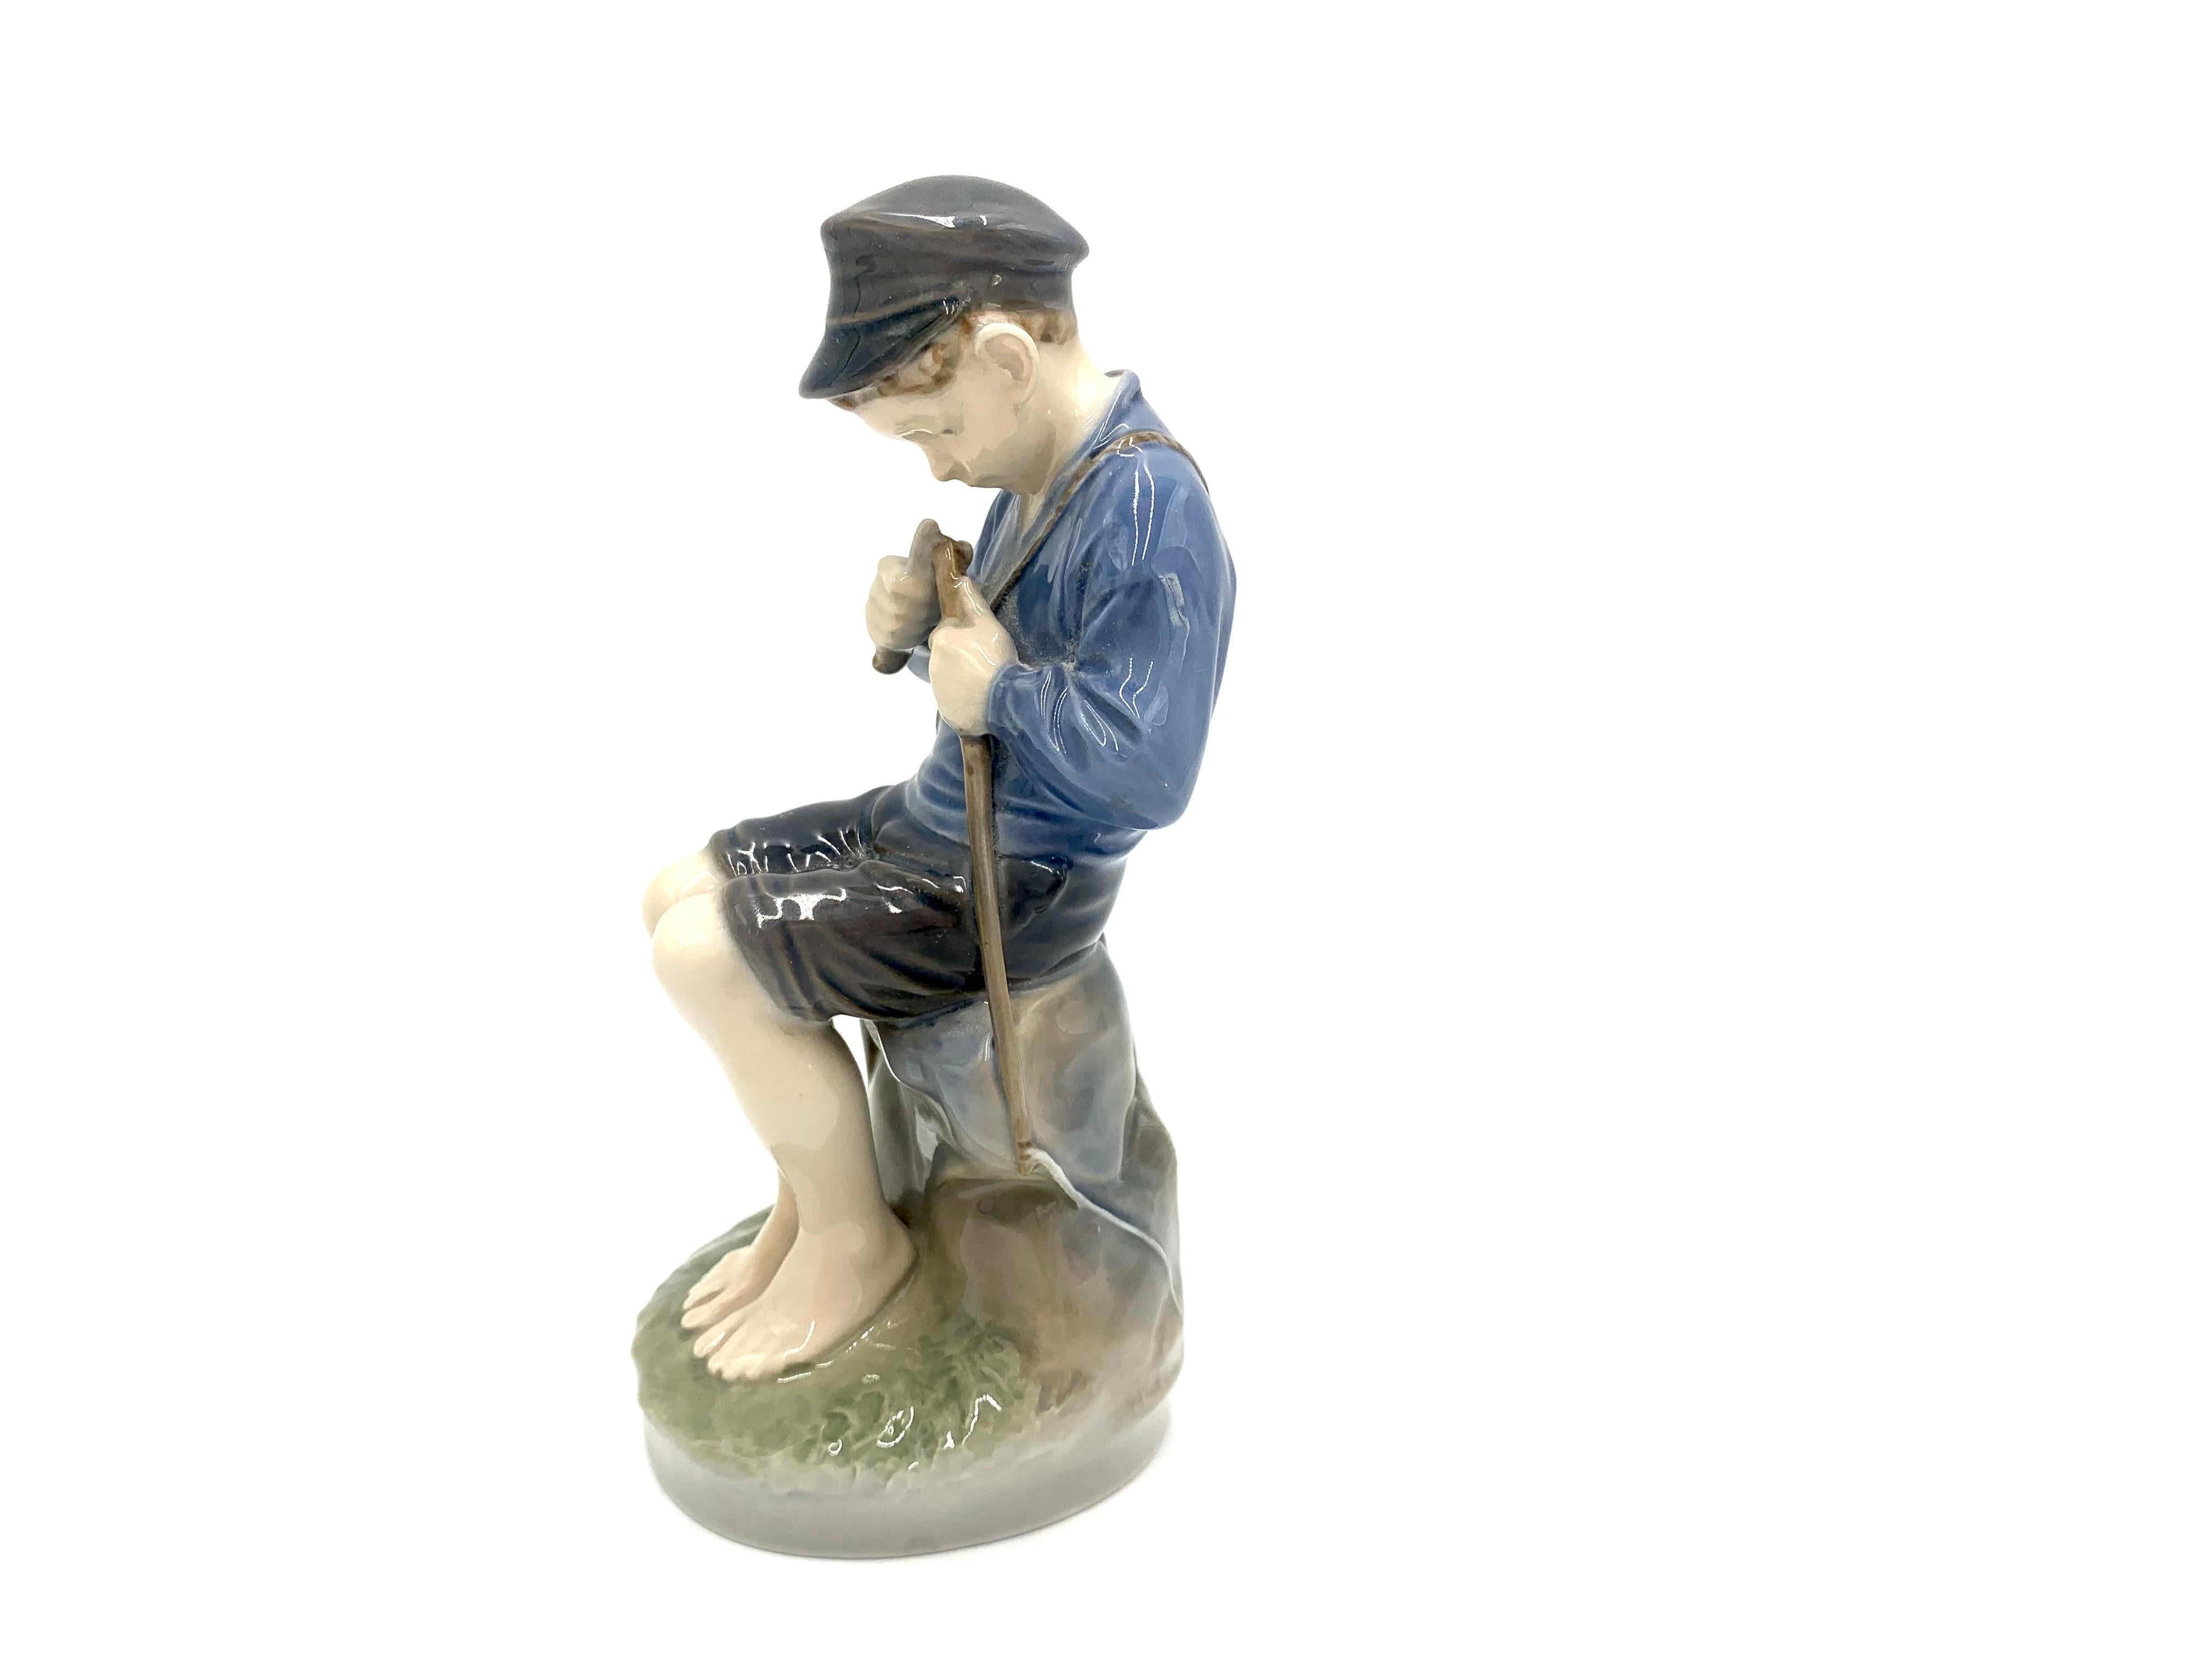 Porcelain figurine of a boy chipping a stick

Made in Denmark by the Royal Copenhagen manufactory

Manufactured in the 1960s.

Model number 905

Very good condition, no damage.

Measures: height 19cm width 8.5cm depth 7cm.